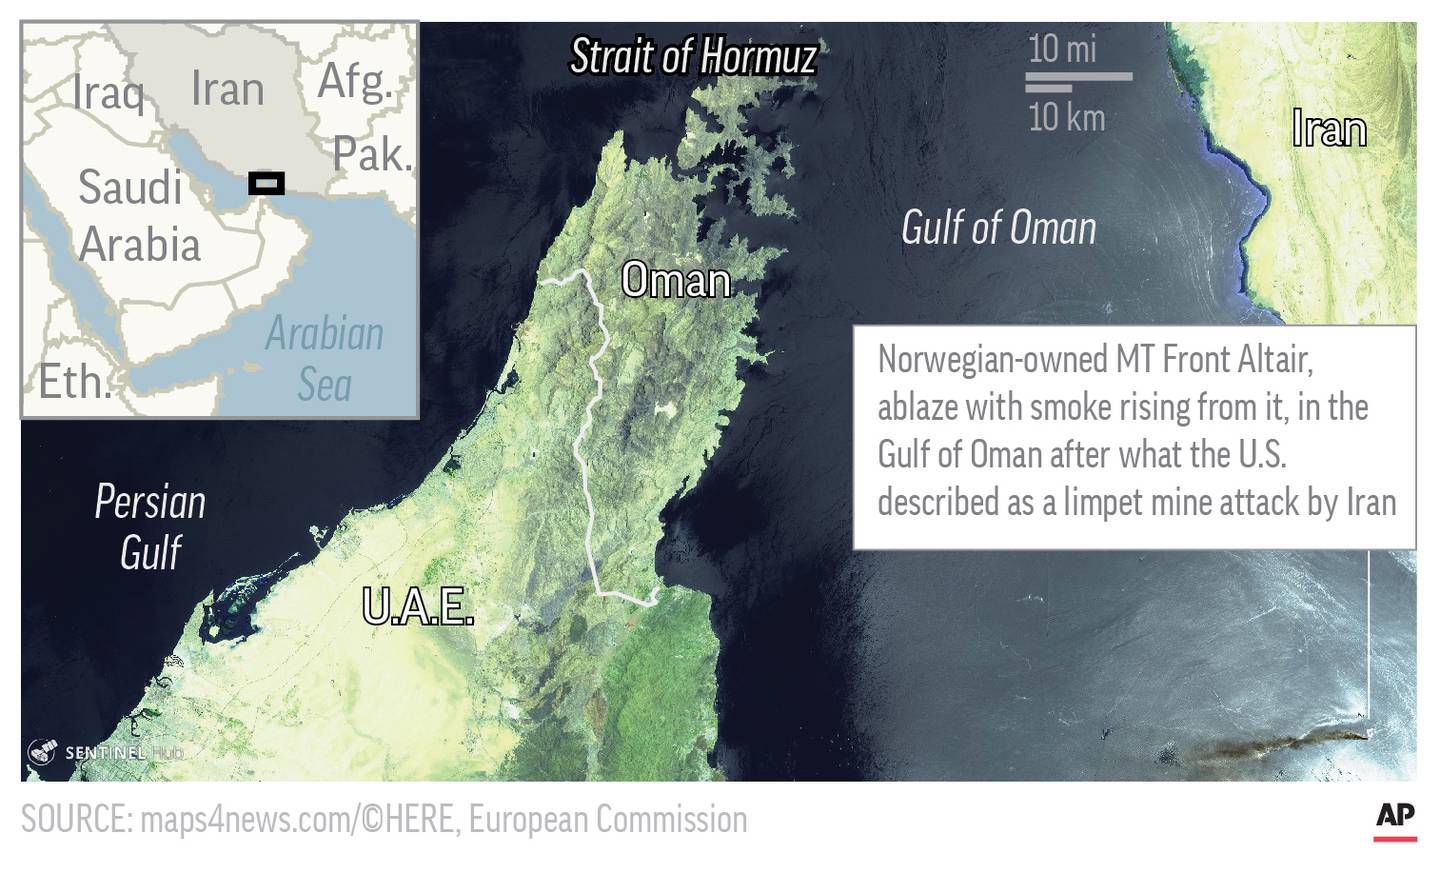 Map shows aerial satellite image of area in the Gulf of Oman, where an oil tanker was attacked.